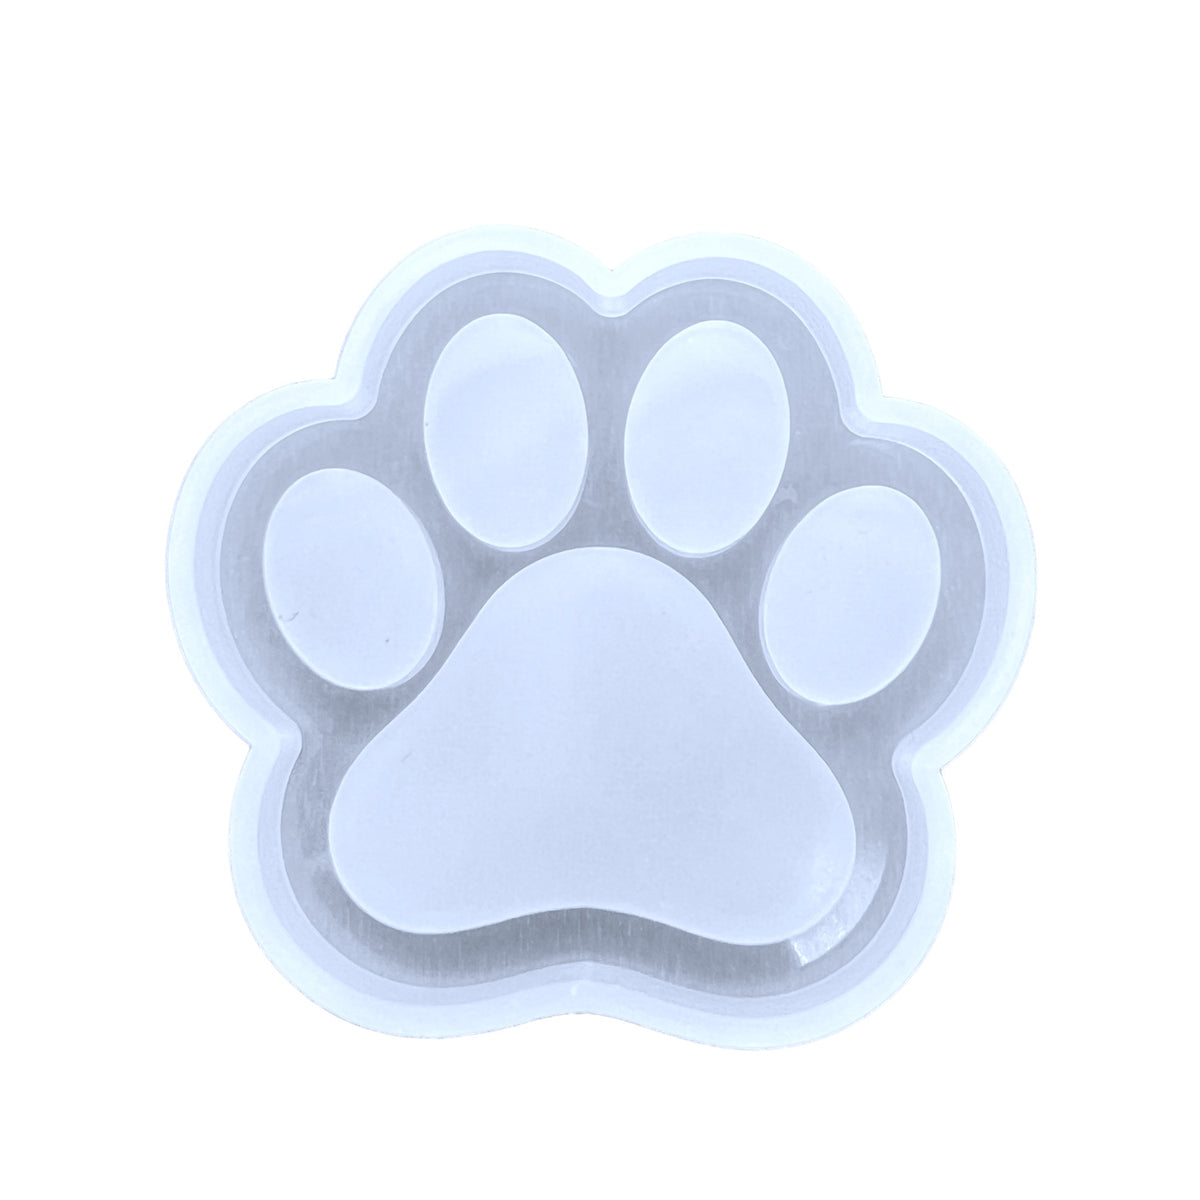 Paw Shaker Silicone Mold for DIY UV Resin and Epoxy Resin Art Heavy Duty